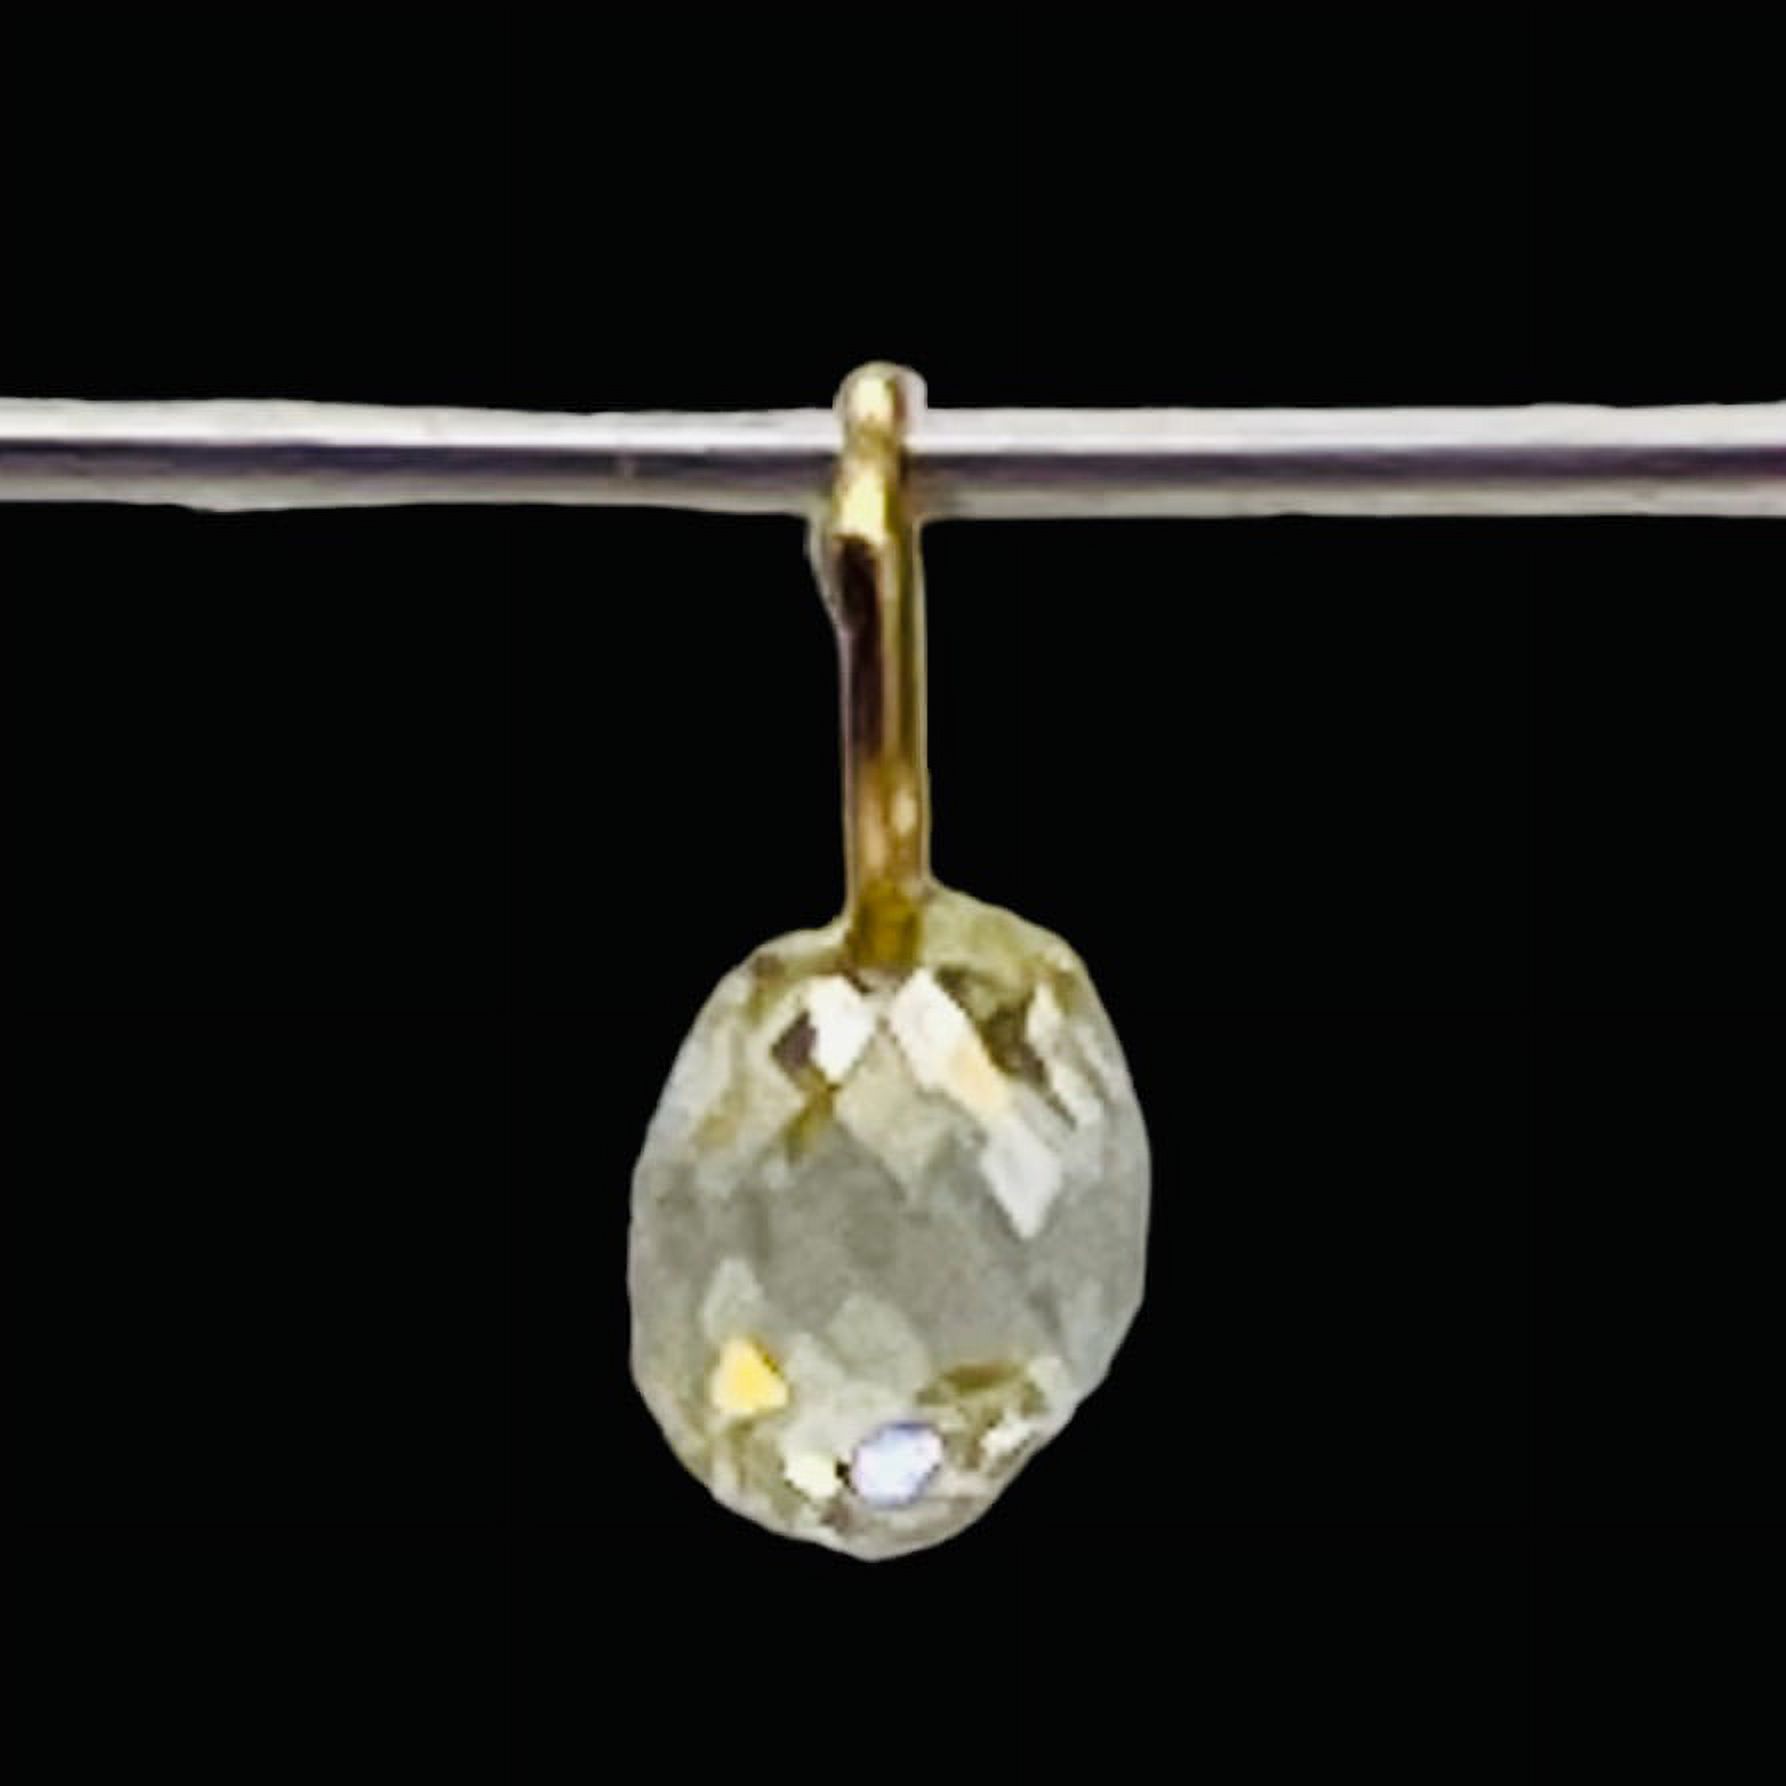 0.39cts Natural Canary Diamond 18K Gold Pendant | 4x3.25x2.75mm | - image 3 of 12